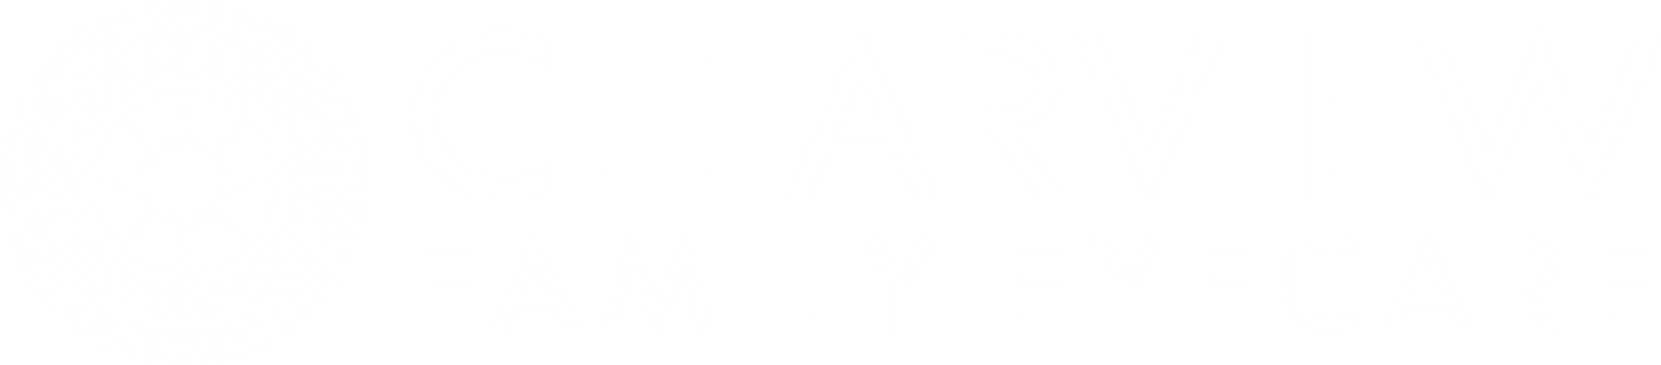 Clearview Family Eyecare Logo